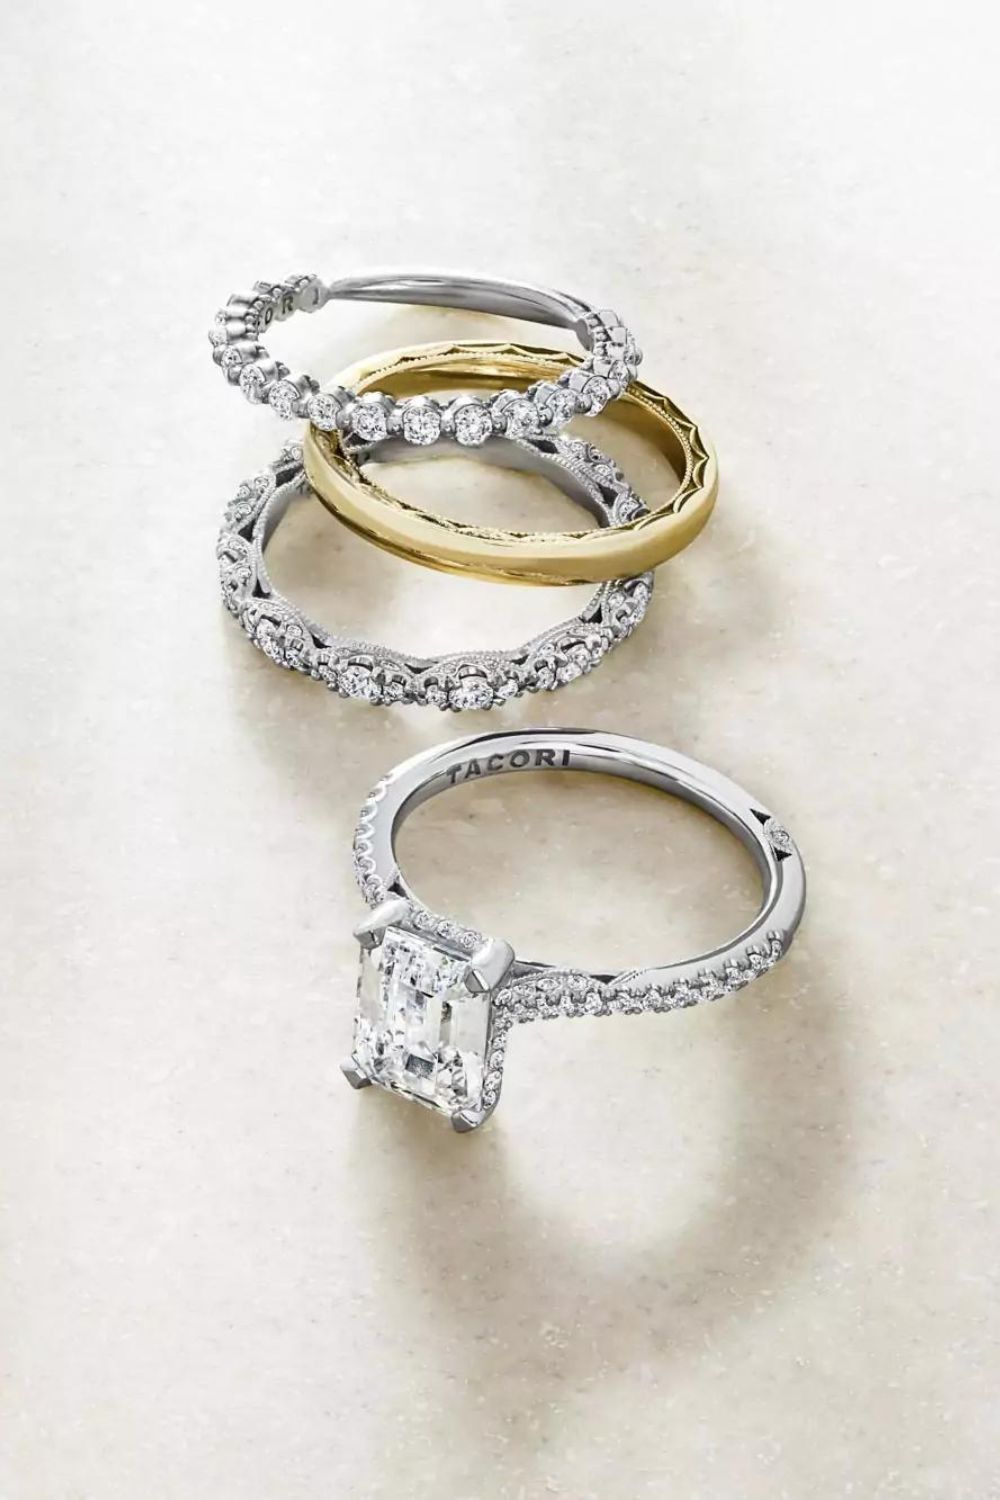 Tips for Engagement Ring Shopping